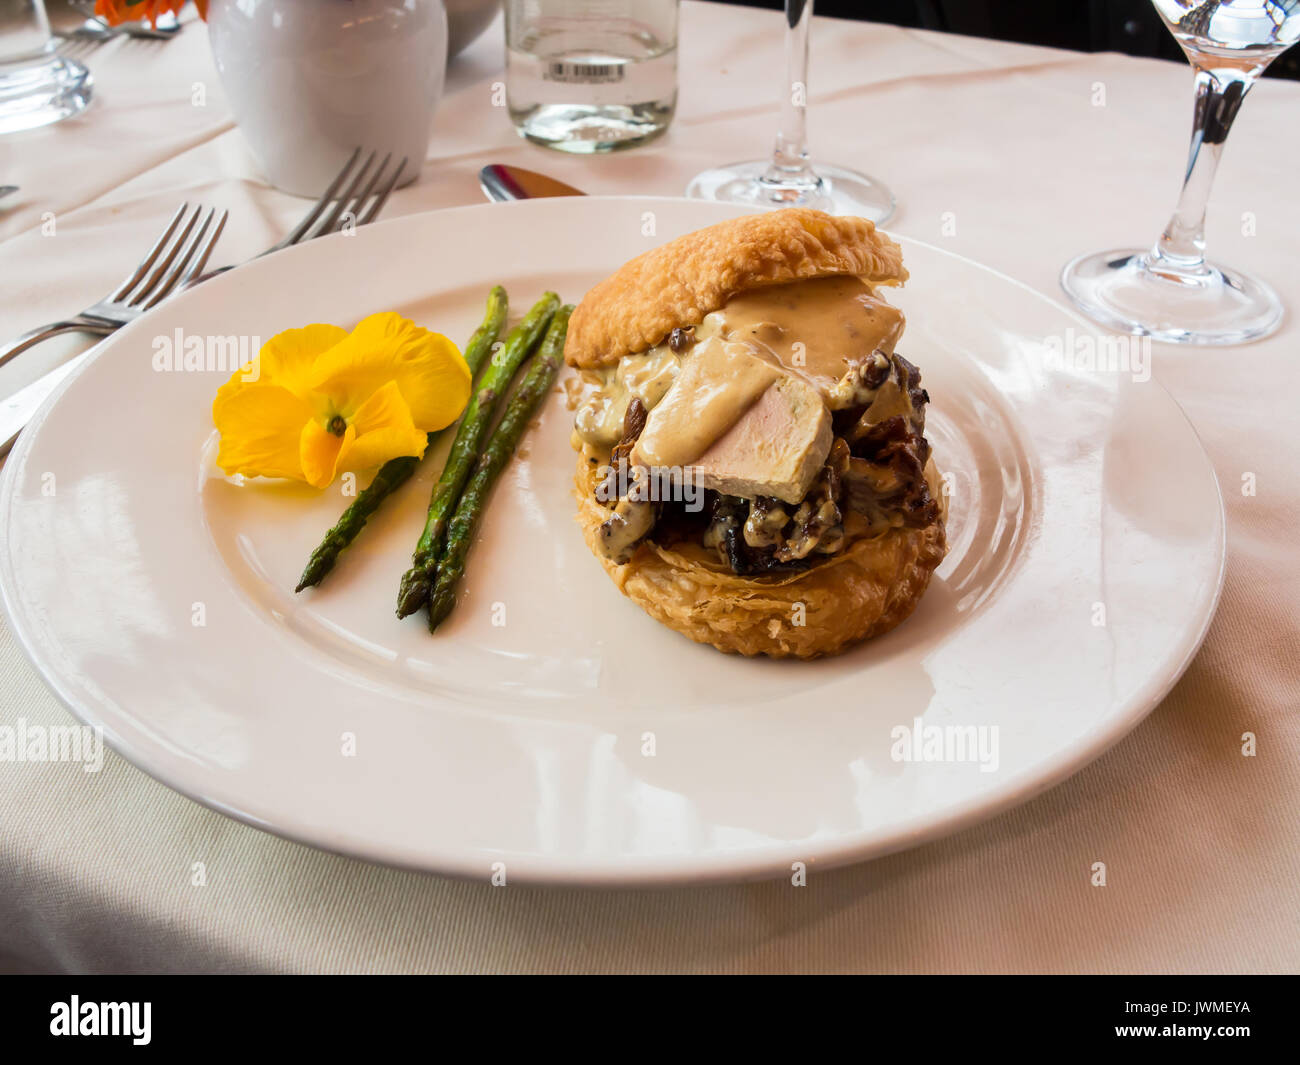 A delicious appetizer of asparagus, mushrooms, foie gras on a white plate on a table Stock Photo